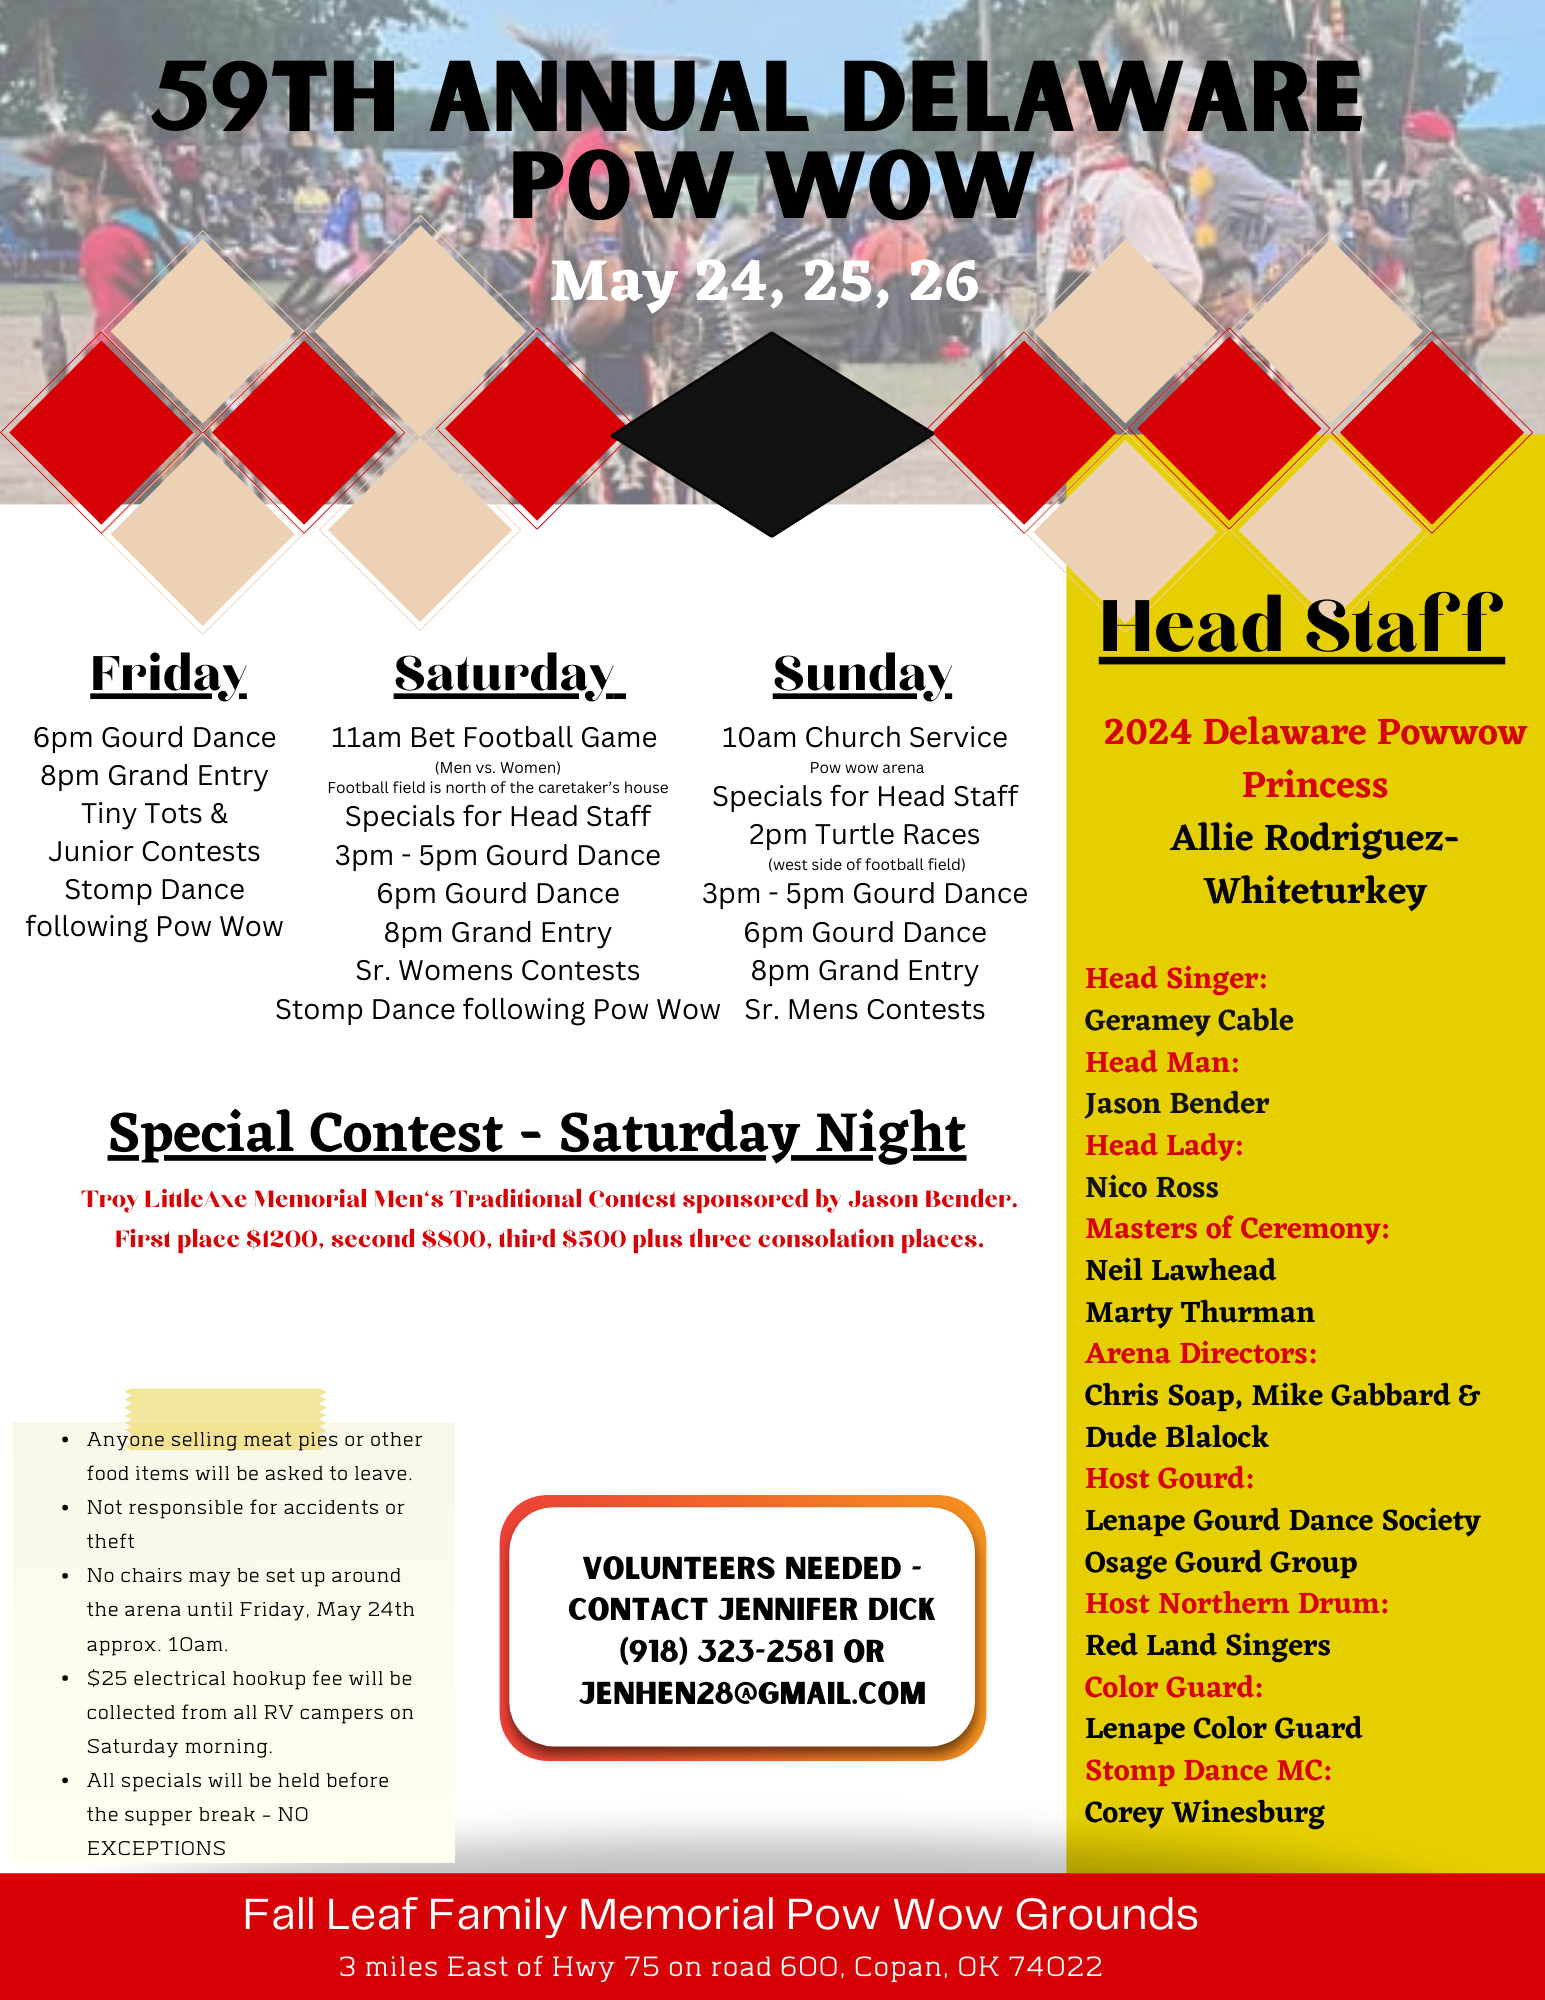 59th Annual Delaware Pow Wow to be held at Fall Leaf Family Memorial Pow Wow Grounds May 24-26, 2024